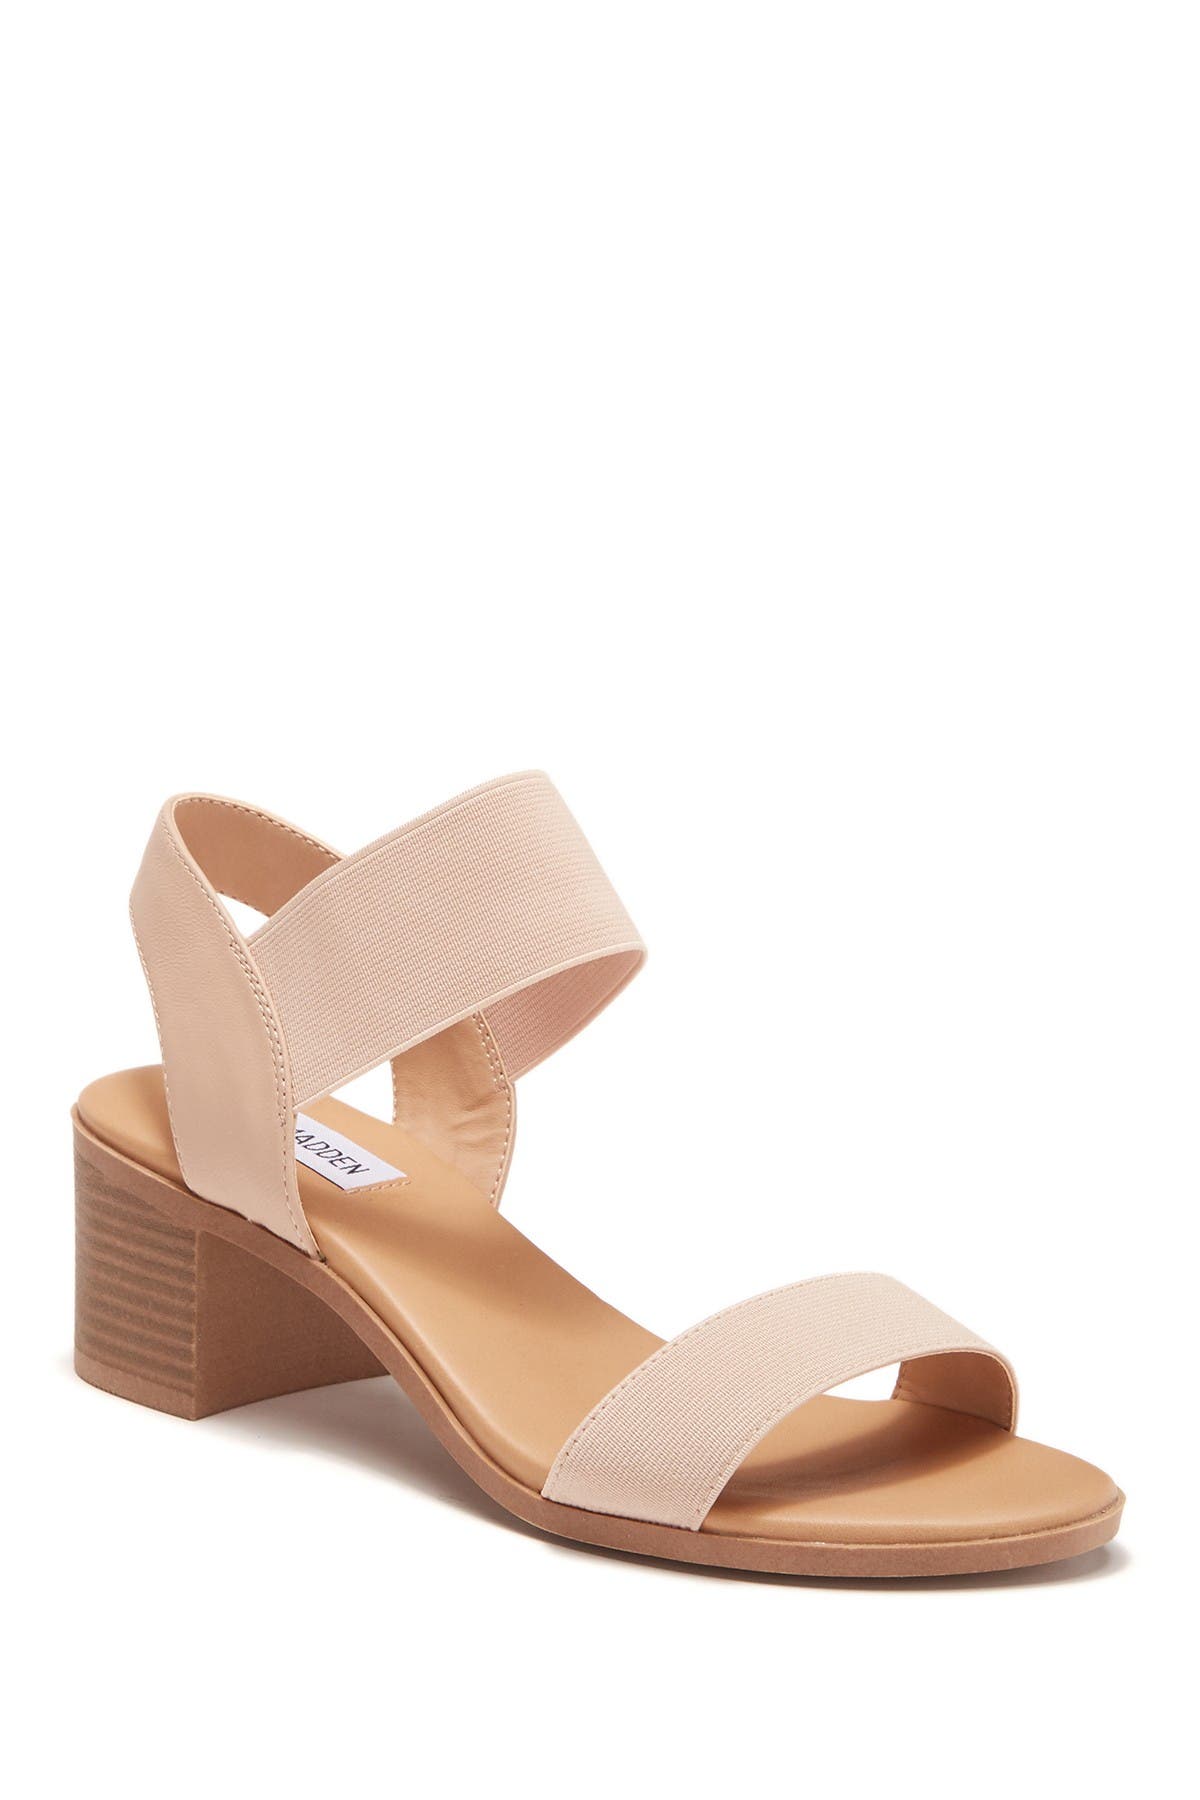 avery low wedges